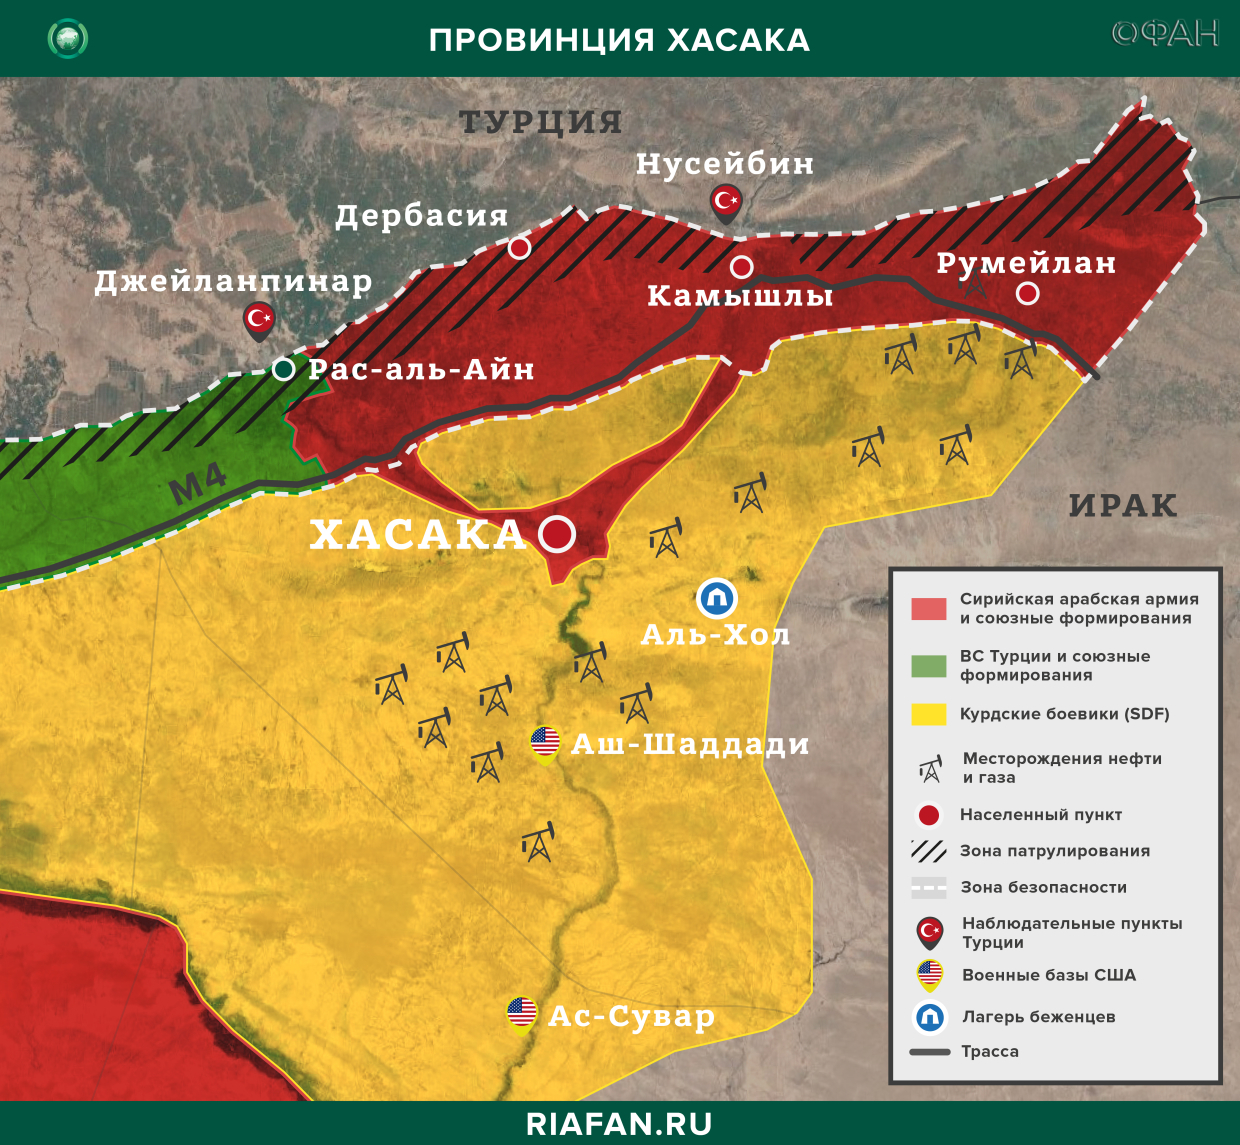 Syria the results of the day on 1 September 06.00: Turkish Armed Forces deployed a new checkpoint in Idlib